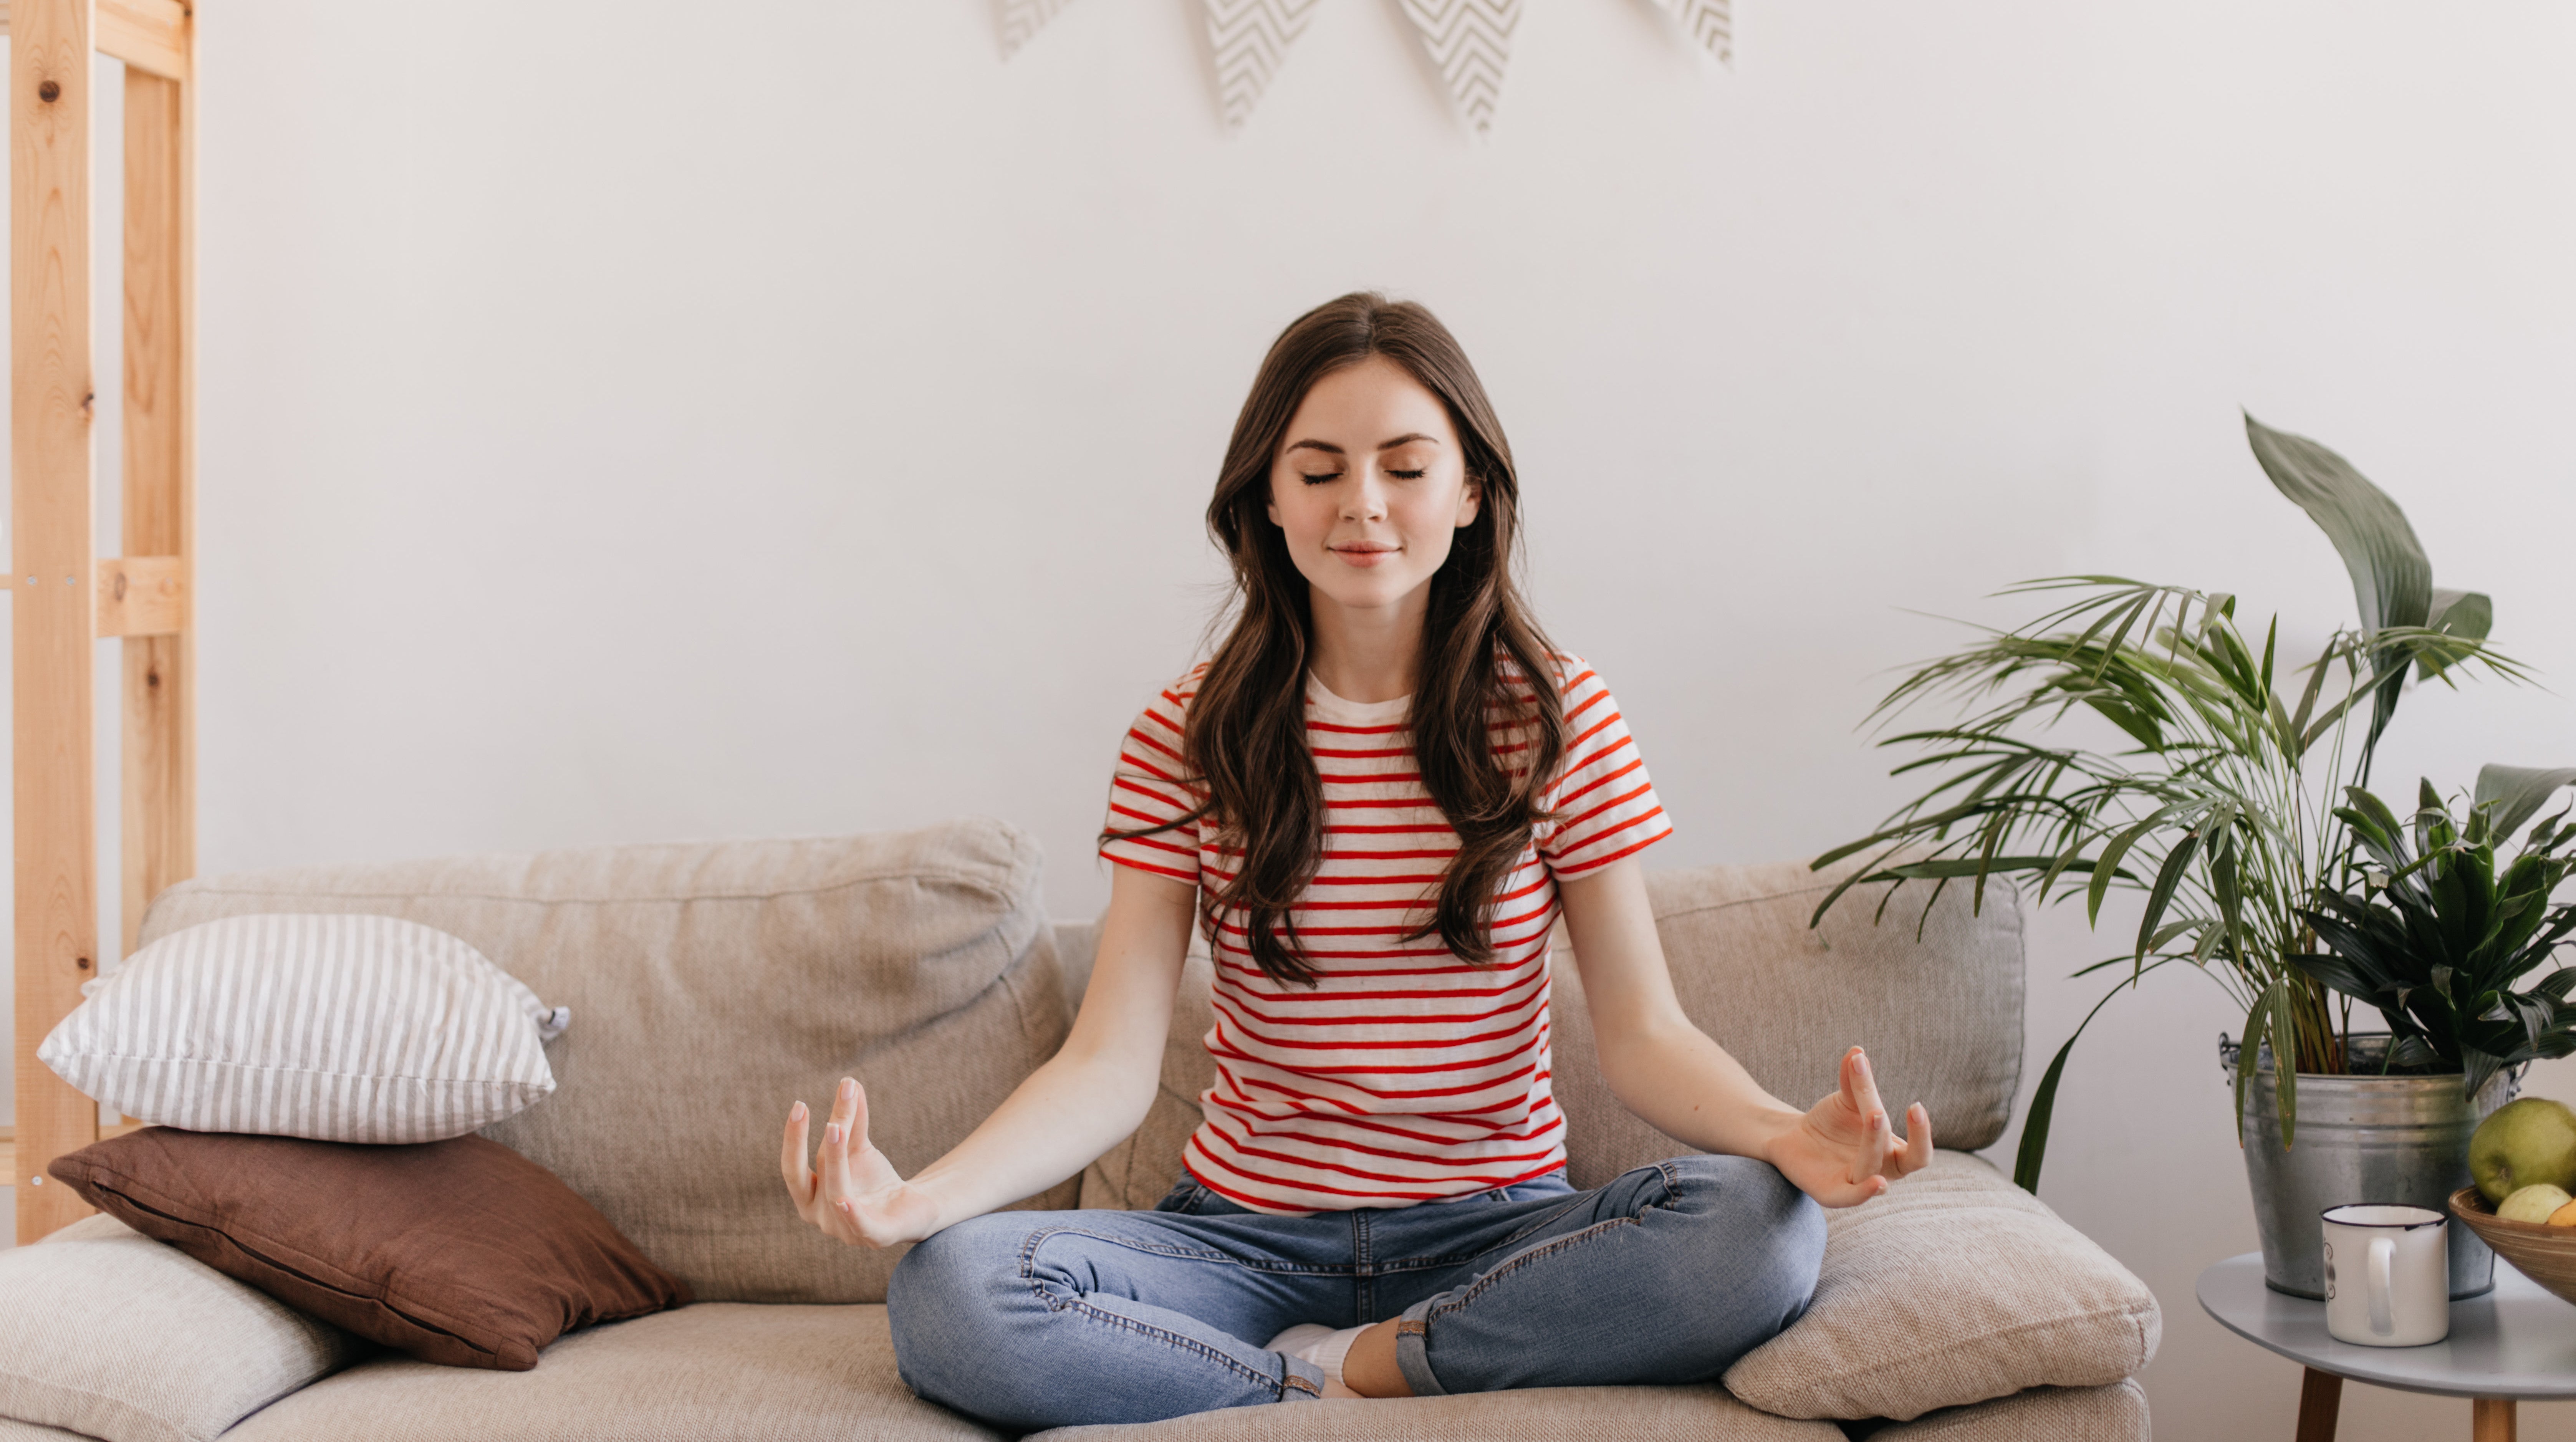 How To Get The Most Out Of Meditation